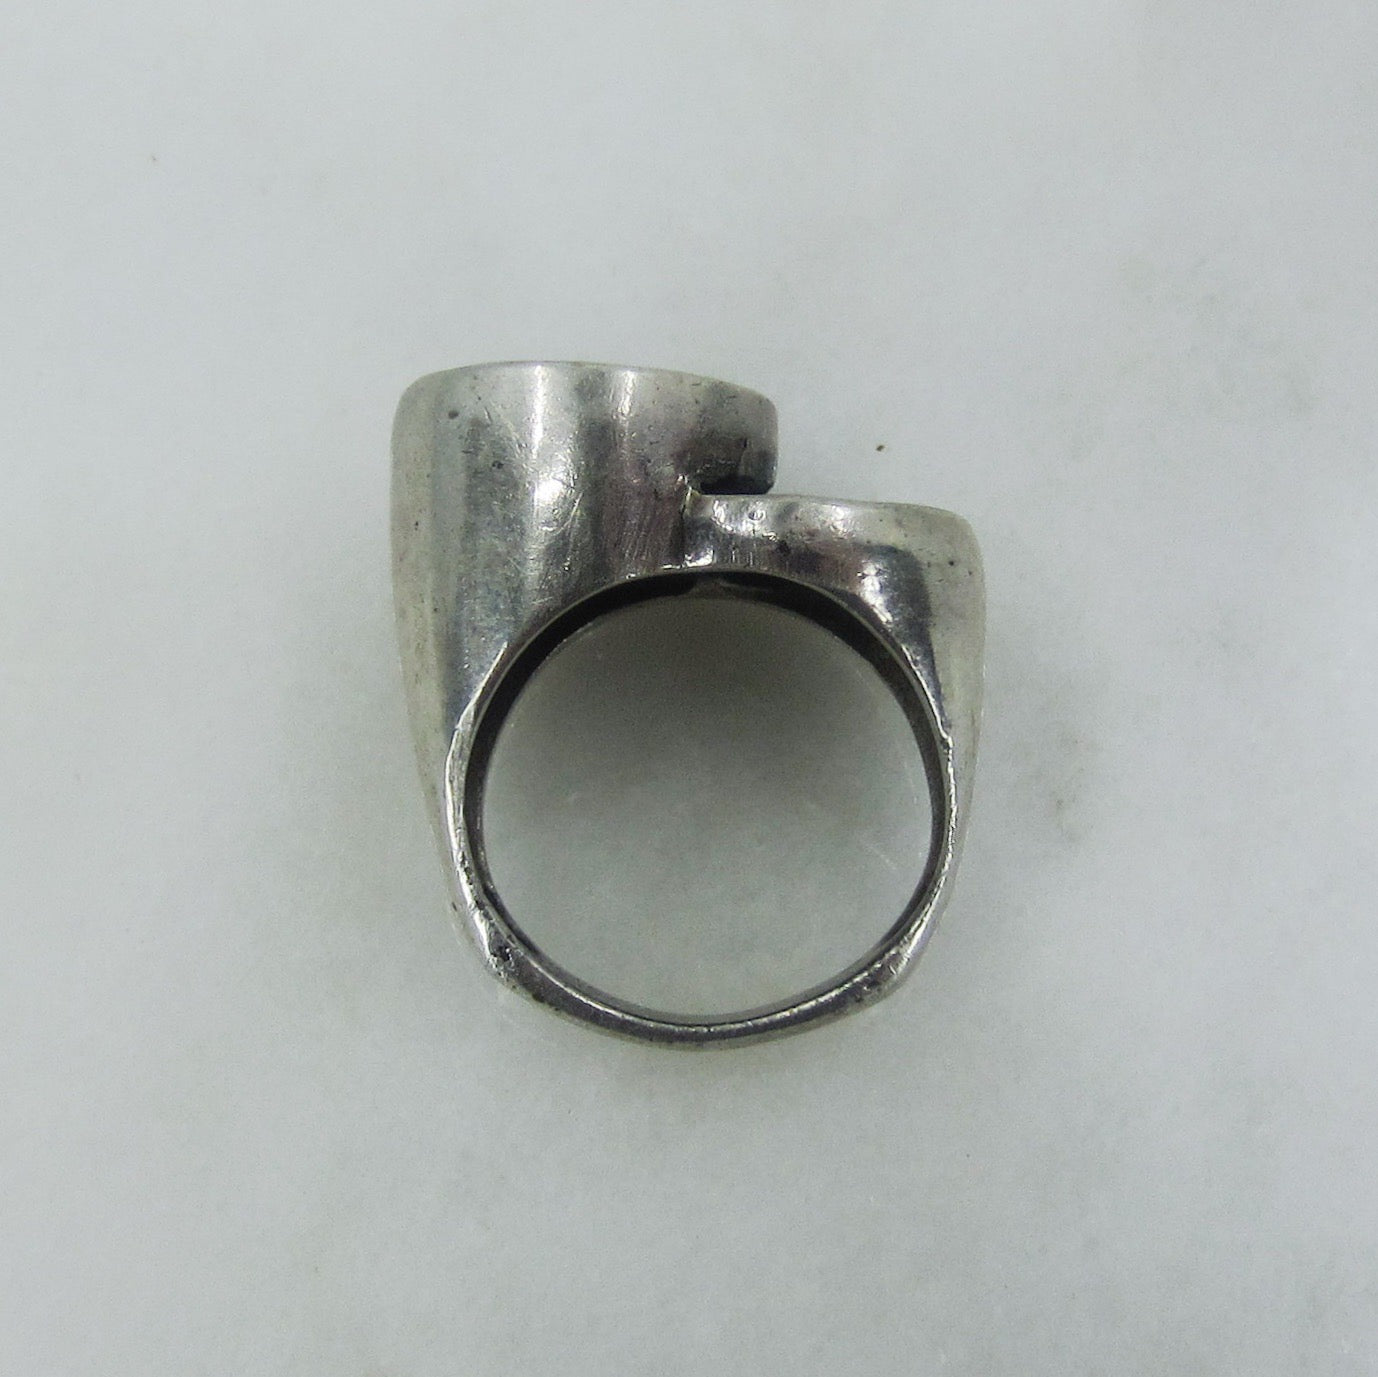 SOLD--Modernist Onyx Circles Ring Sterling c. 1970